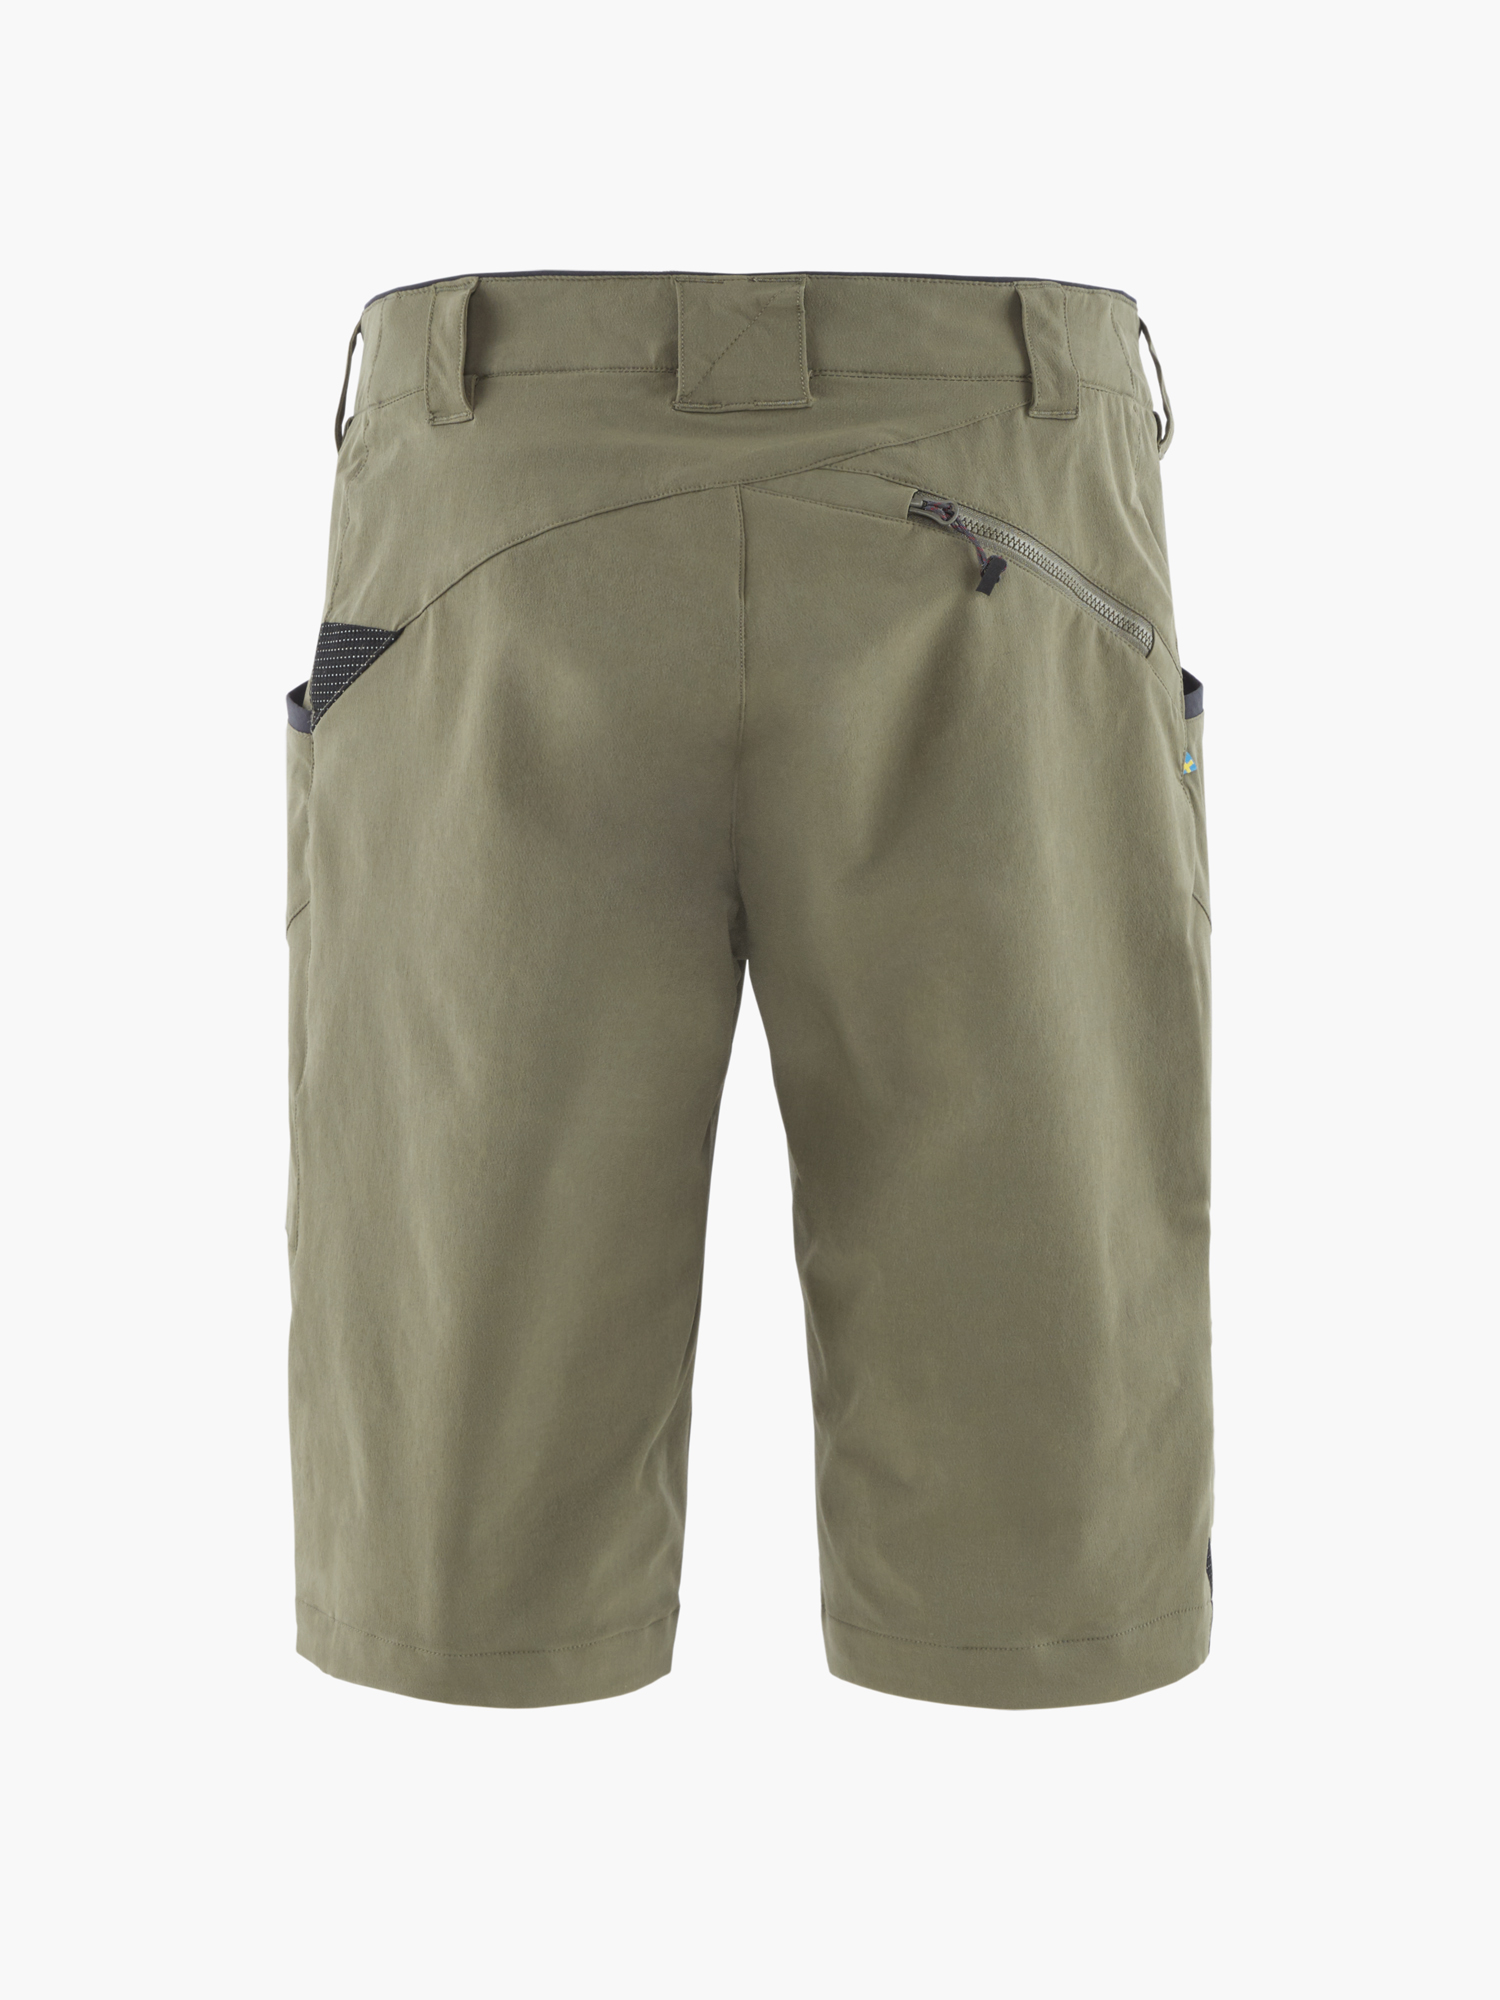 15574M91 - Magne 2.0 Shorts M's - Dusty Green